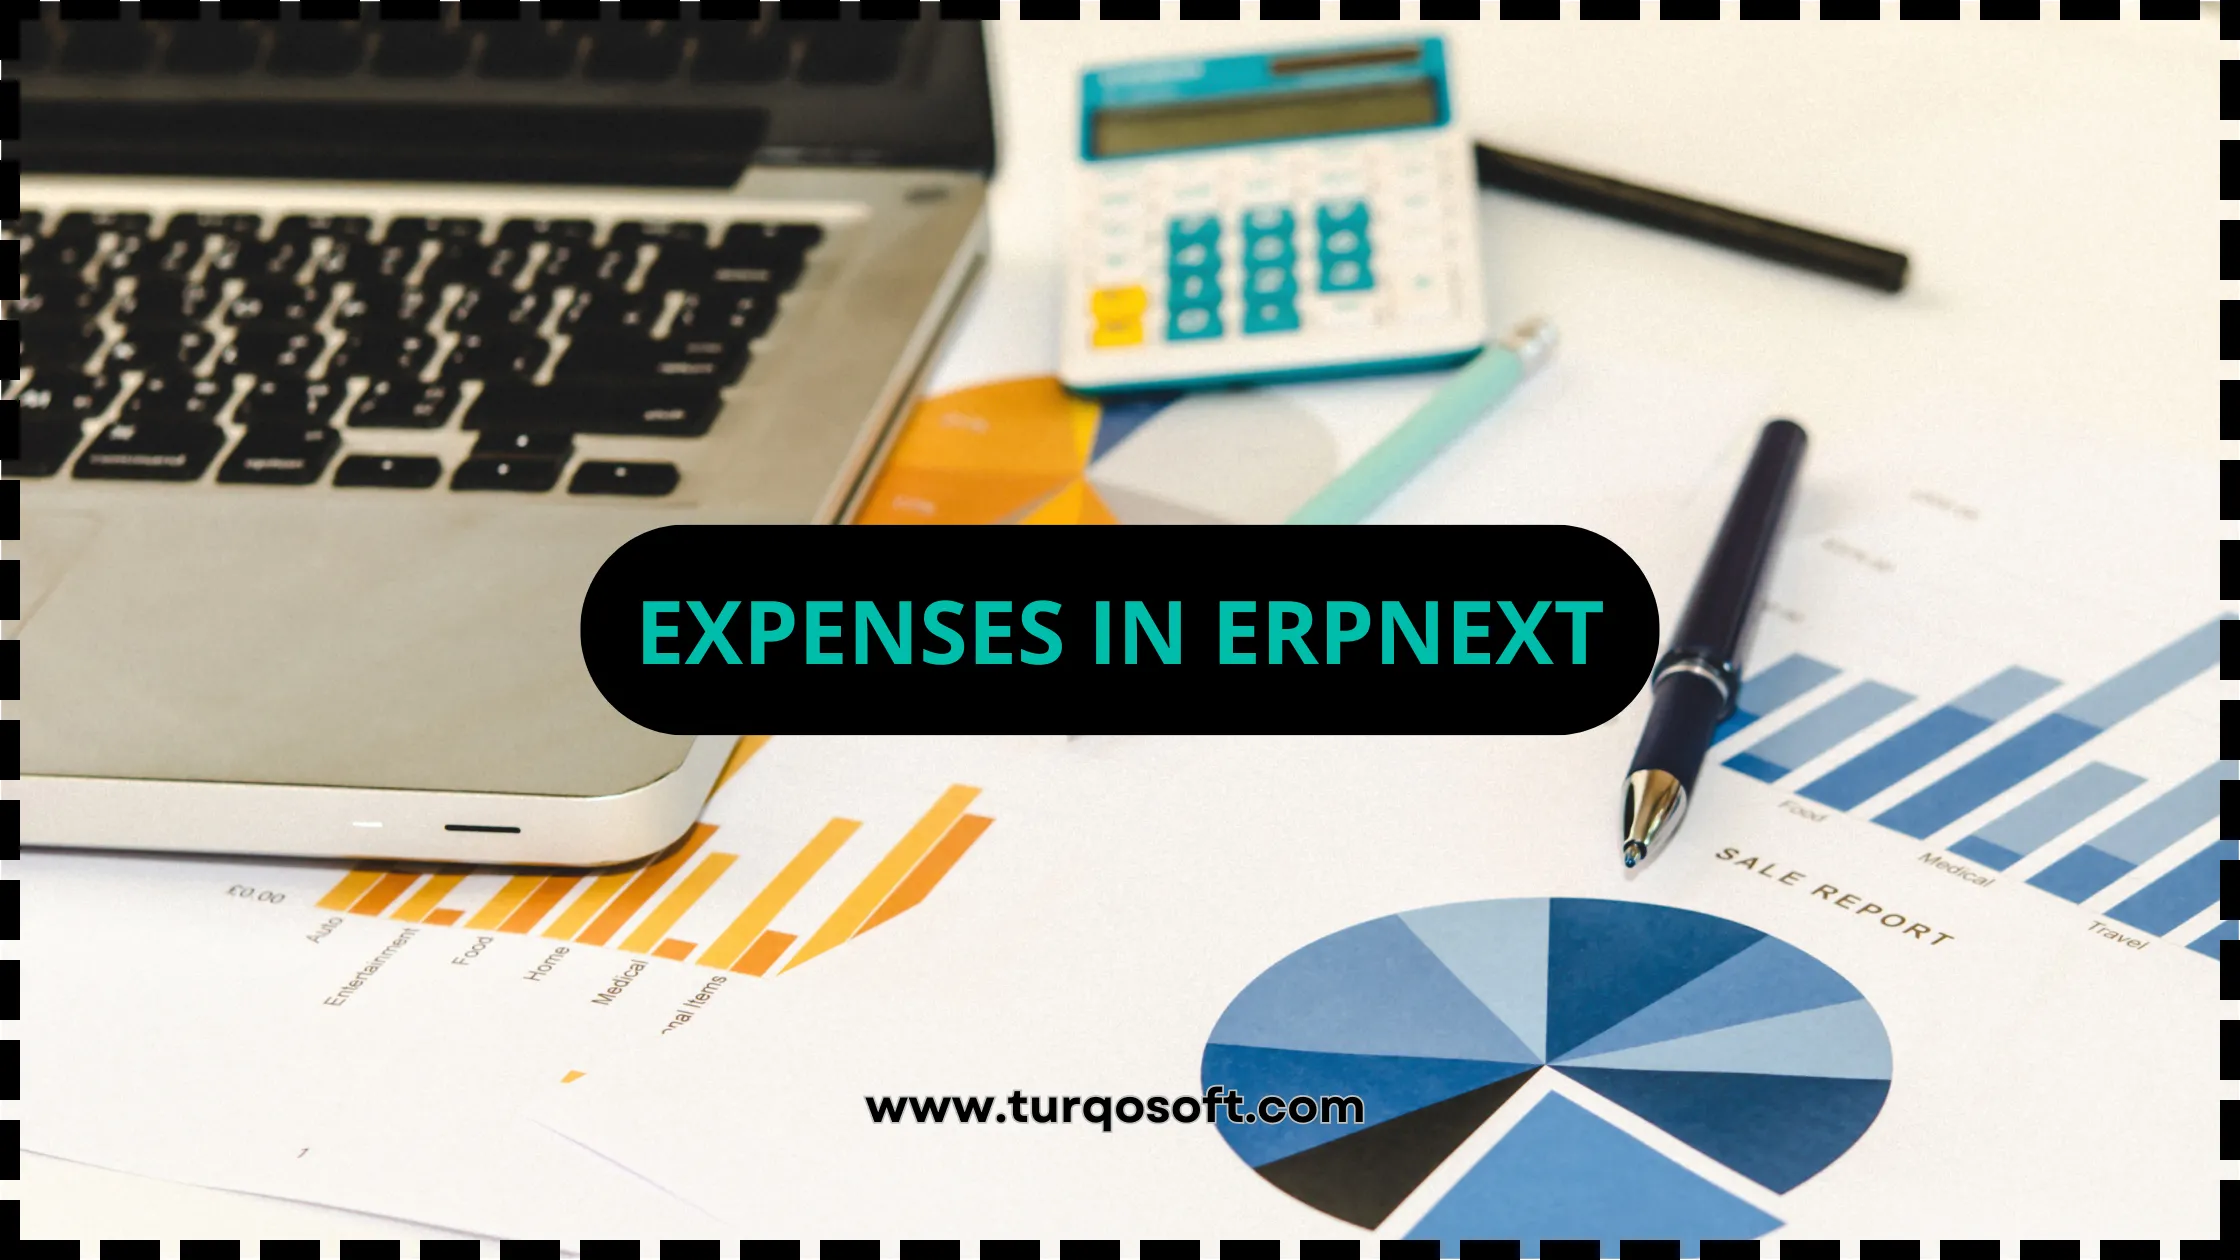 Enter Expenses in ERPNext with Journal Entry